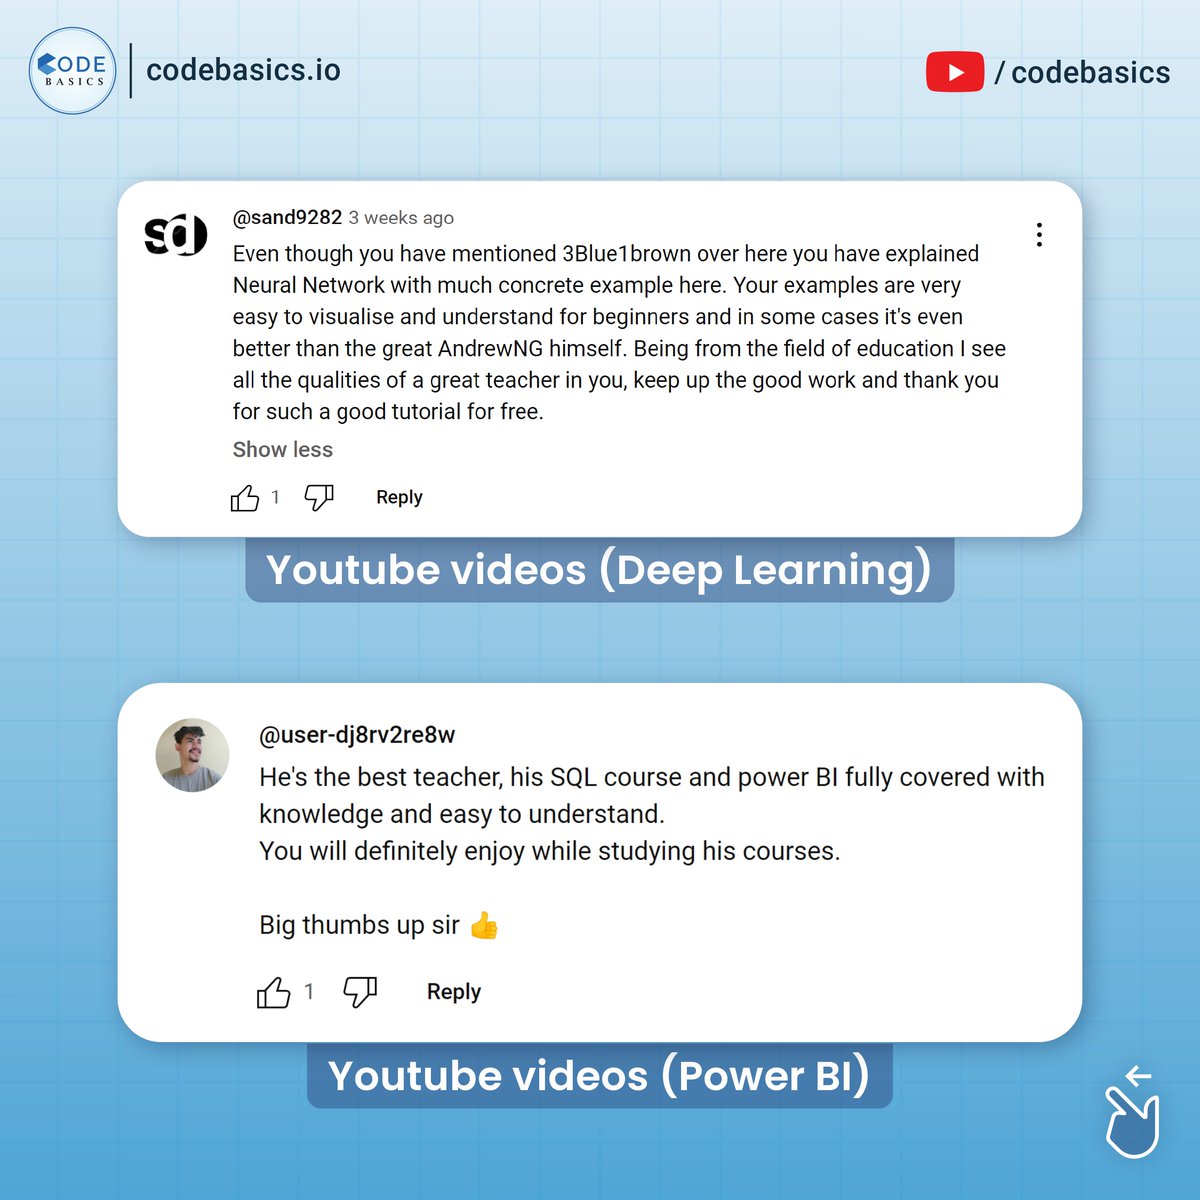 When people ask us how do you come up with such content every time? This is the answer.

#codebasics #powerbi #sql #mysql #reviews #honestreviews #realreviews #machinelearning #datascience #datasciencejobs #datasciencecourse #datascienceeducation #datasciencelearning